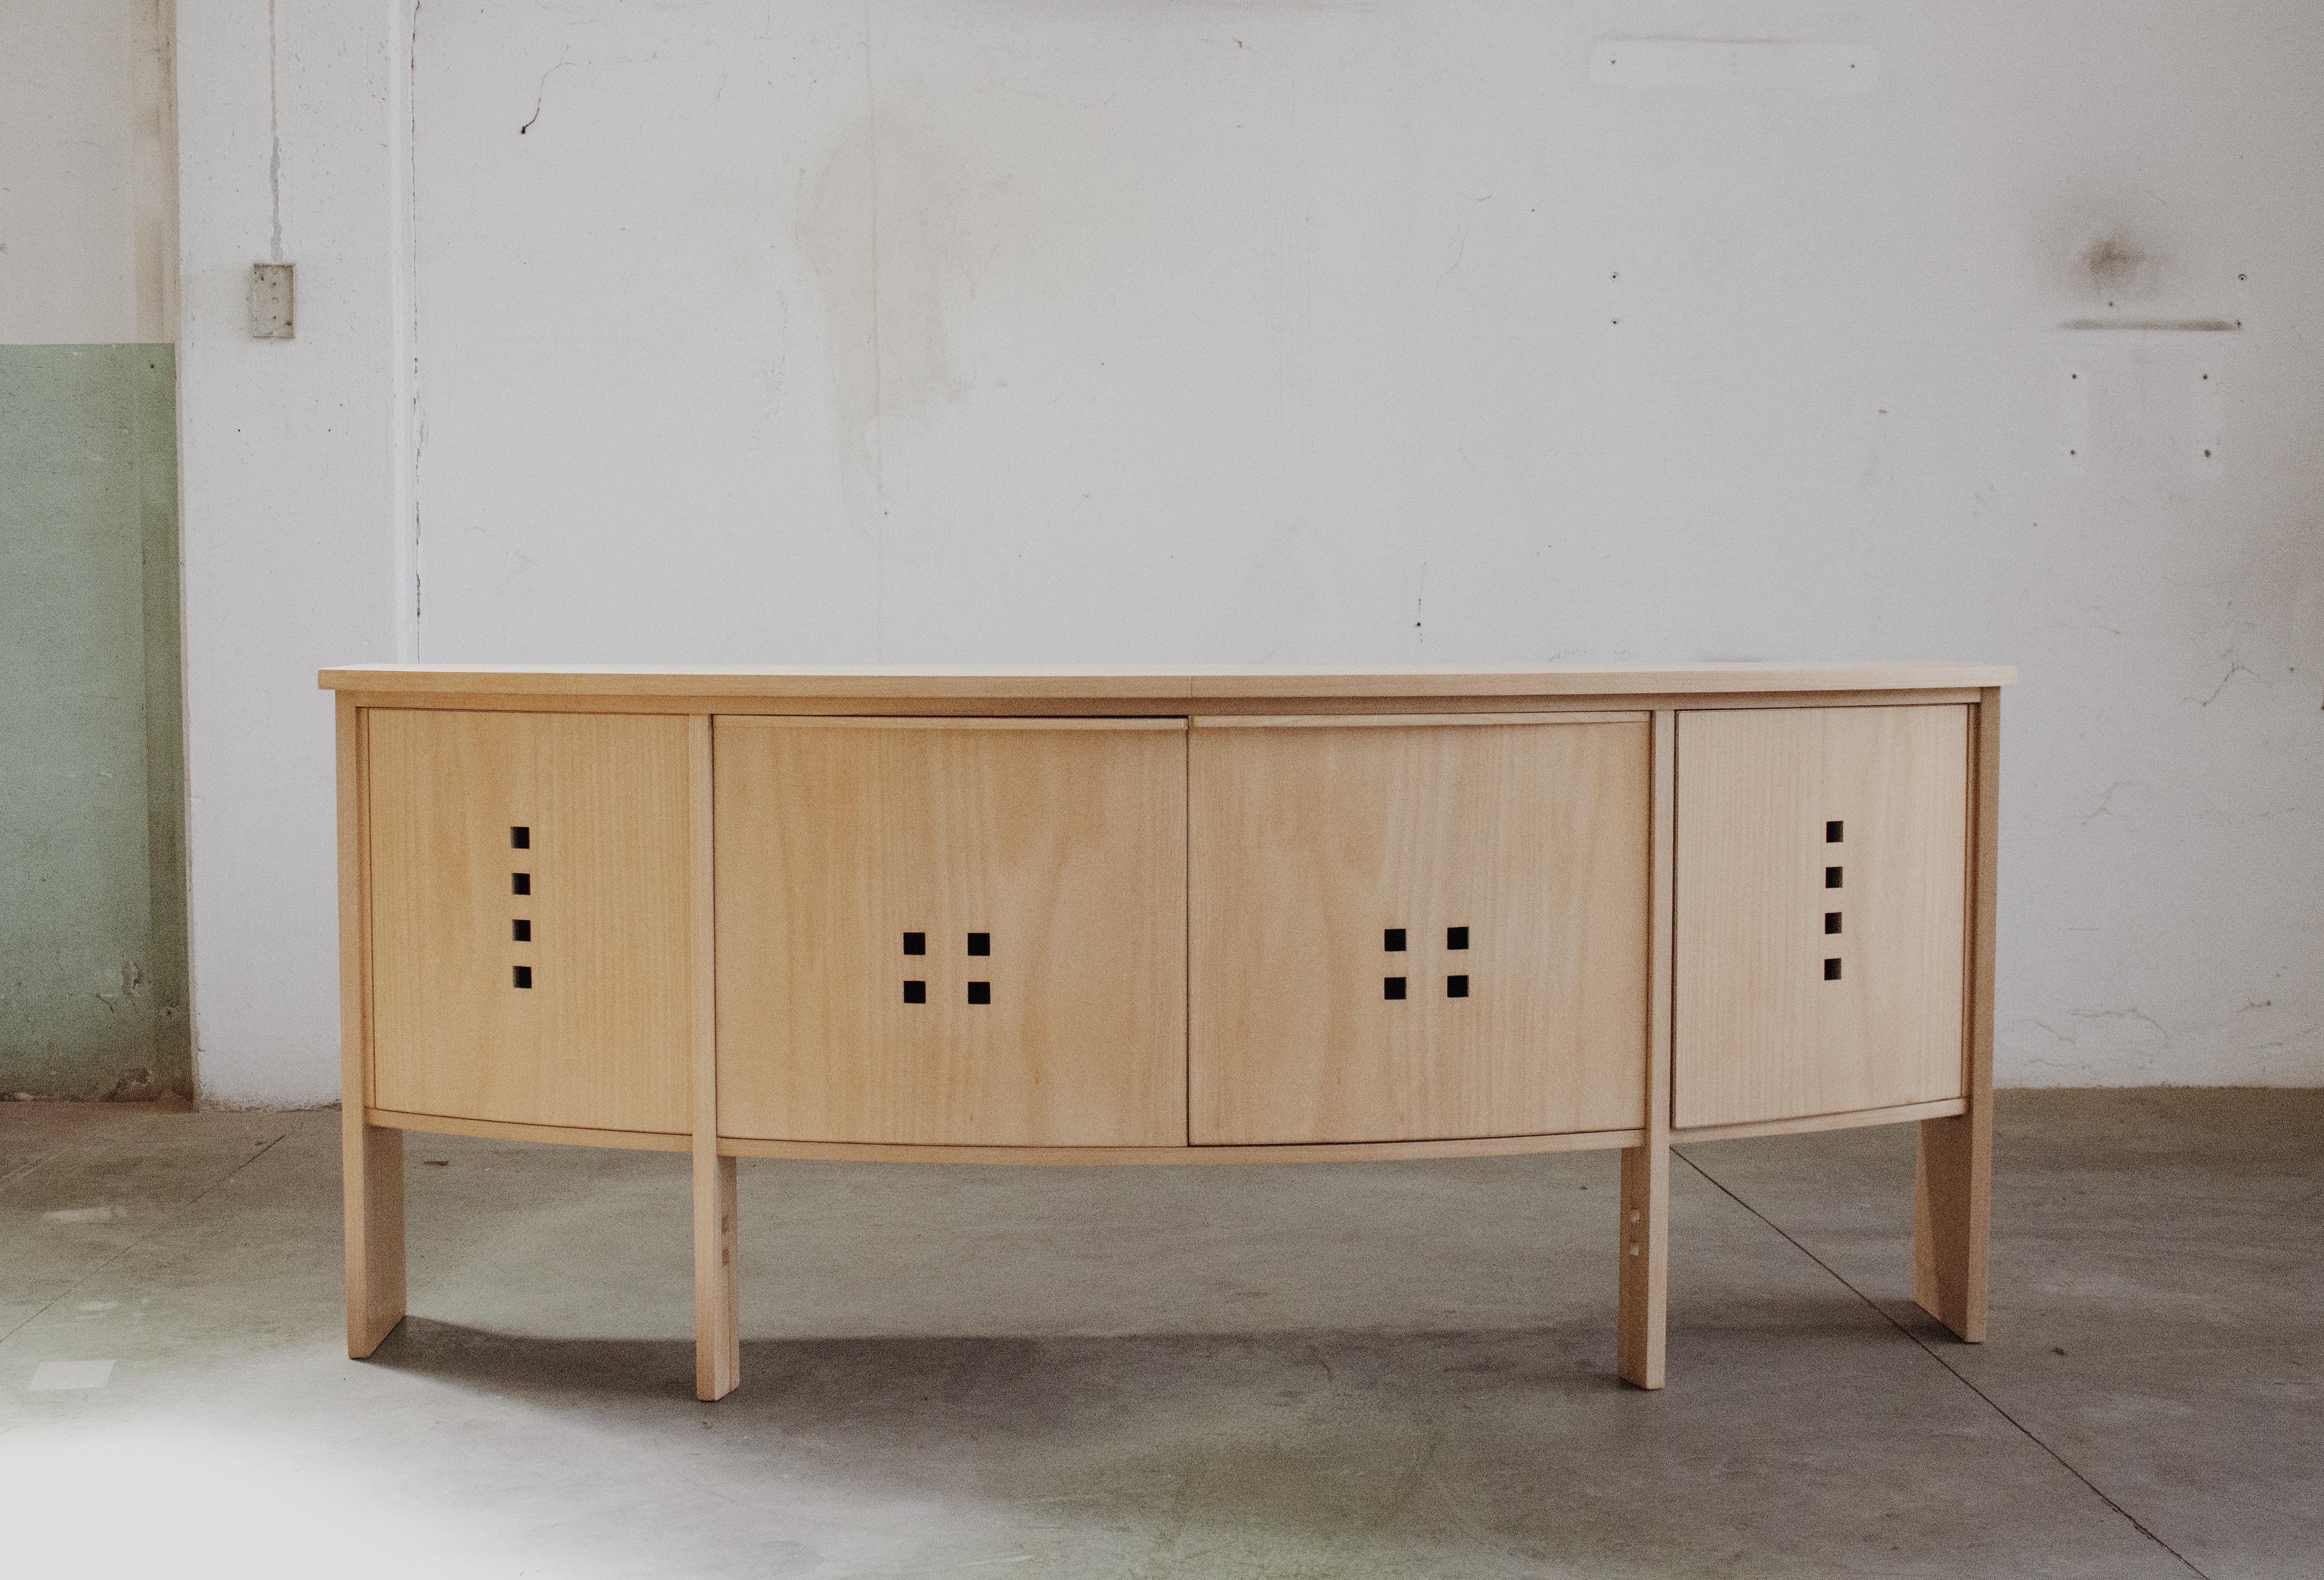 Umberto Asnago modernist wooden sideboard for Giorgetti, wood, Italy, 1987.

This sideboard shows the vital characteristics of the Italian designer Umberto Asnago. The base has narrow vertical legs and provides a floating appearance to the storage